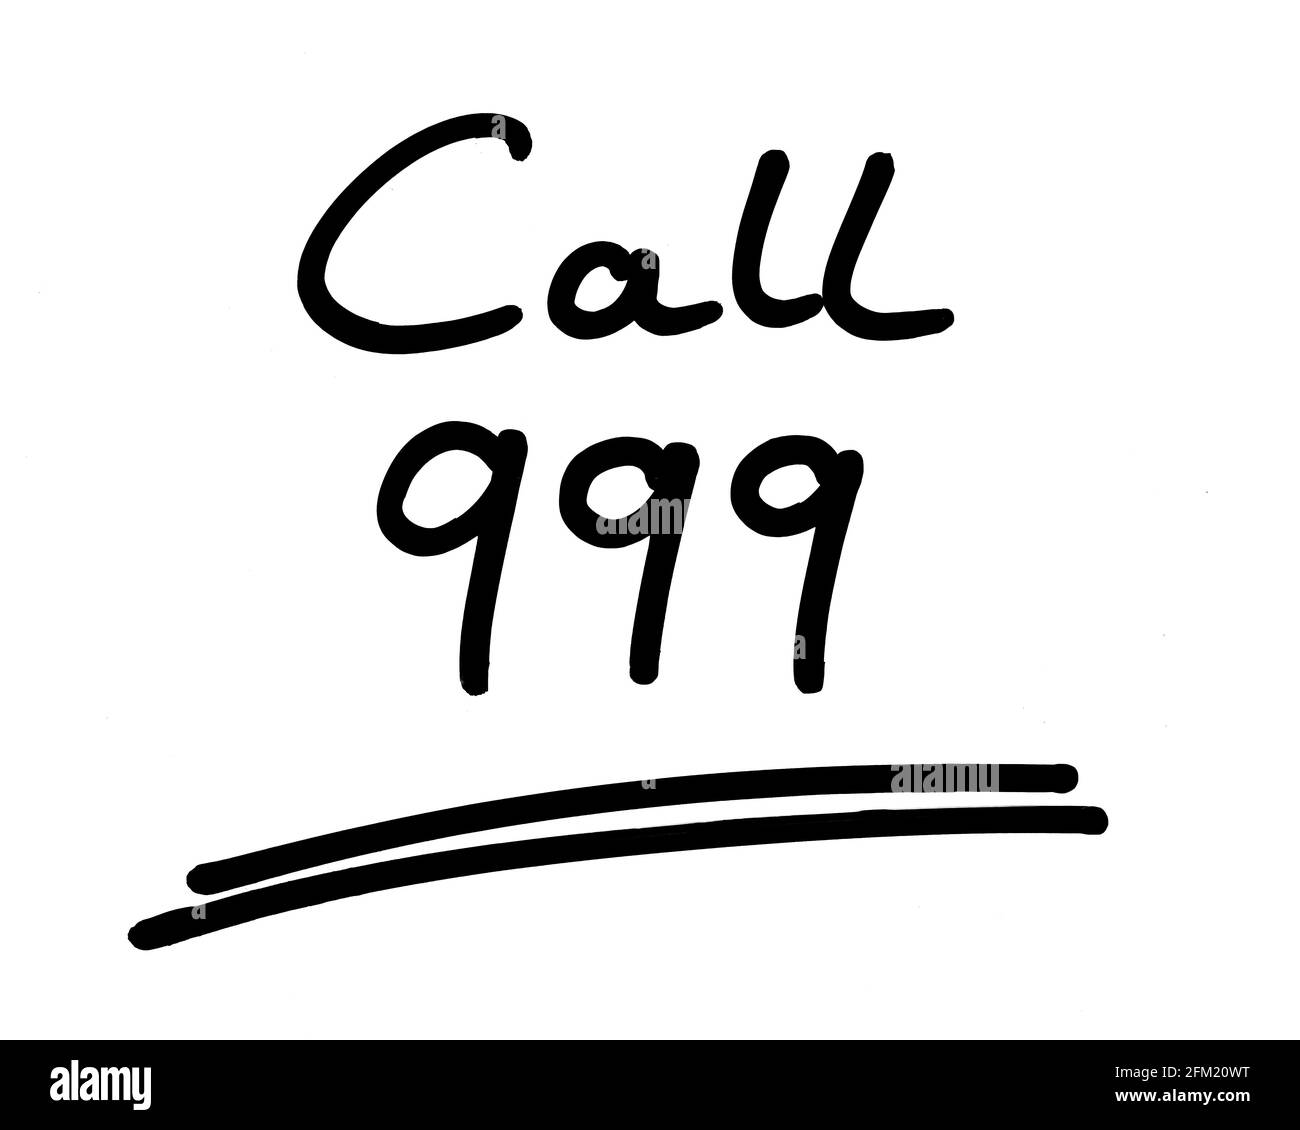 Call 999 handwritten on a white background. Stock Photo